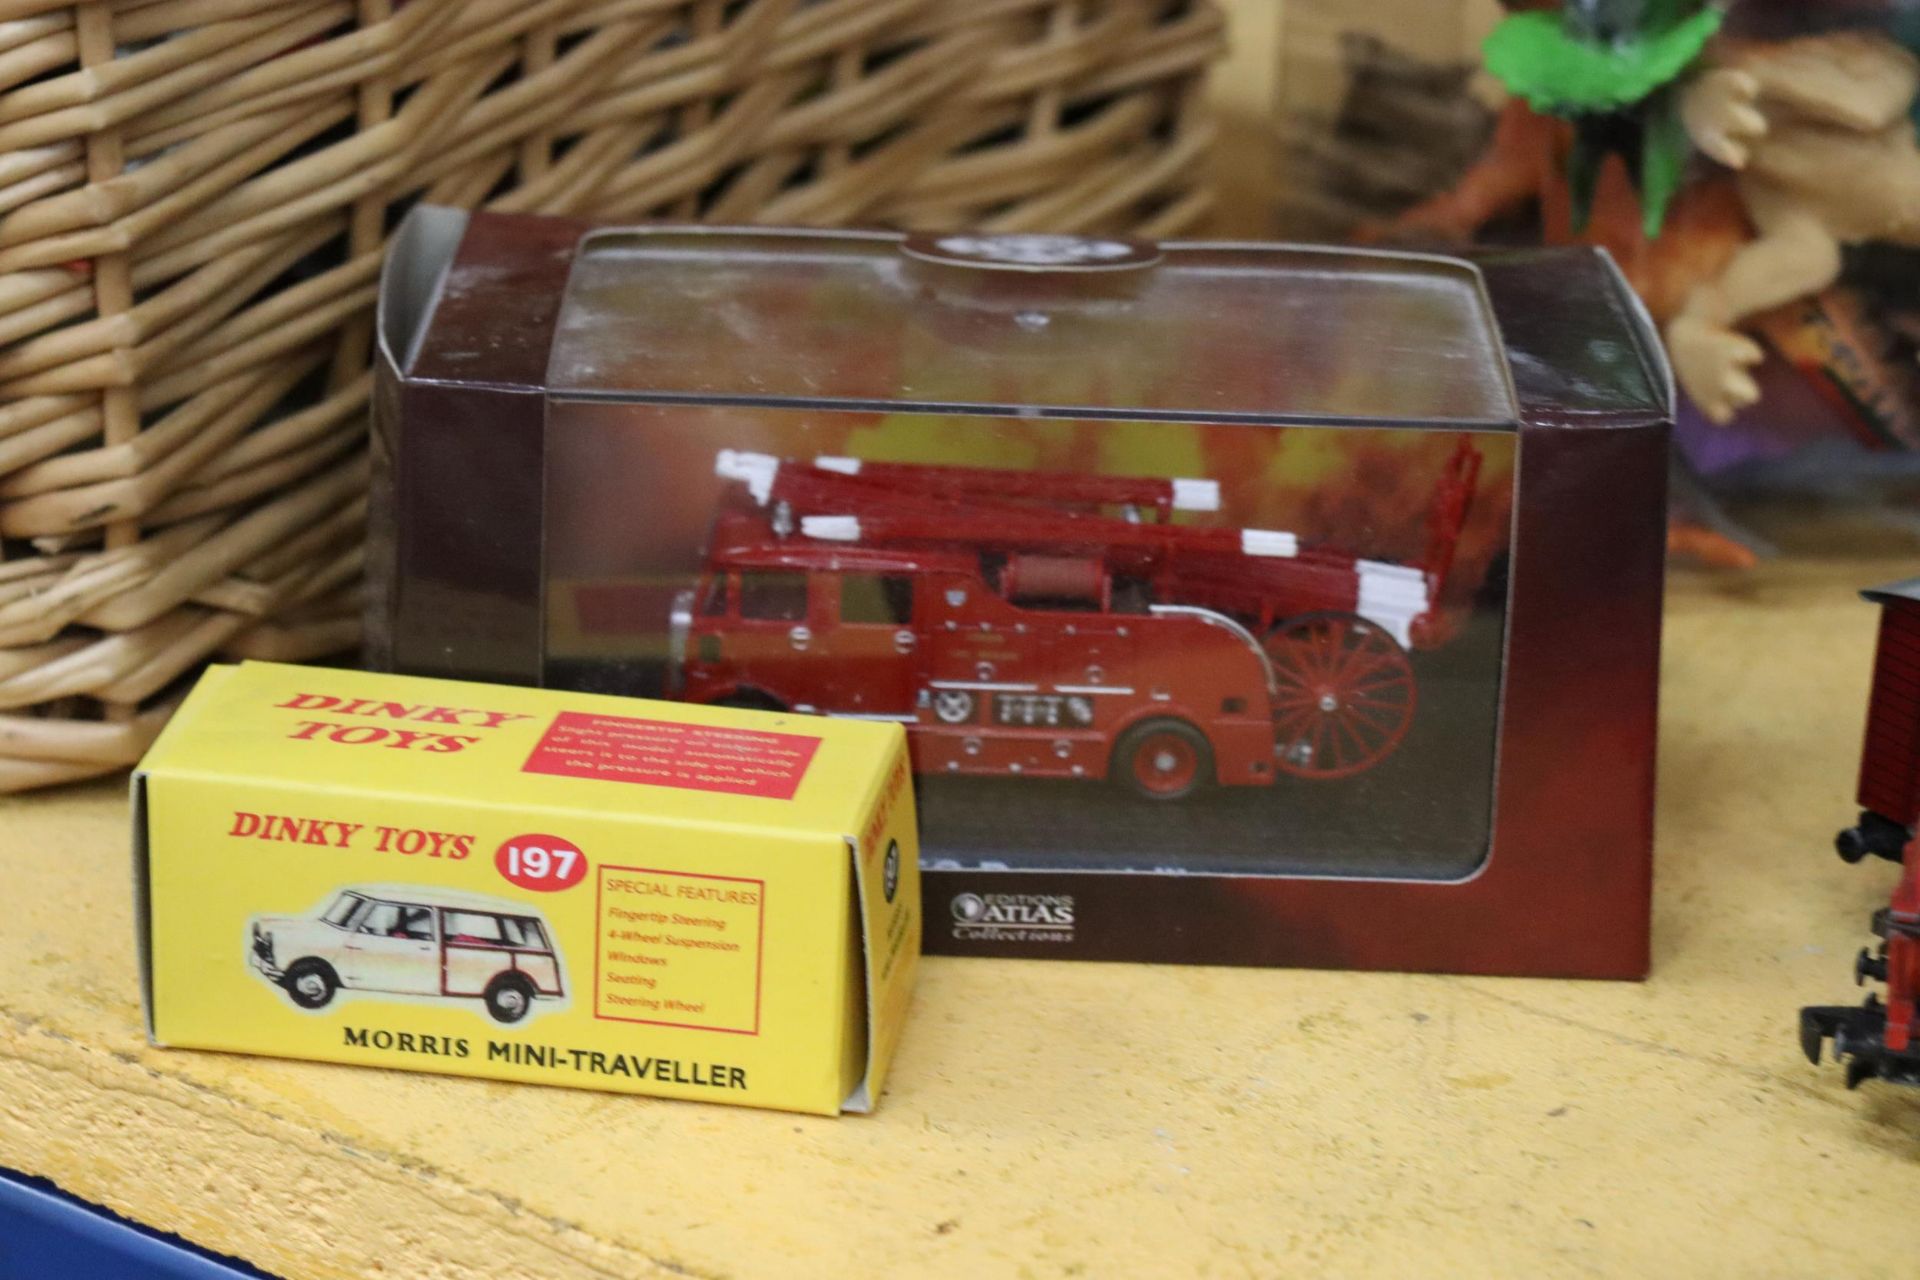 A BOXED DINKY TOYS, NO. 197 MORRIS MINI-TRAVELLER PLUS A BOXED ATLAS FIRE ENGINE